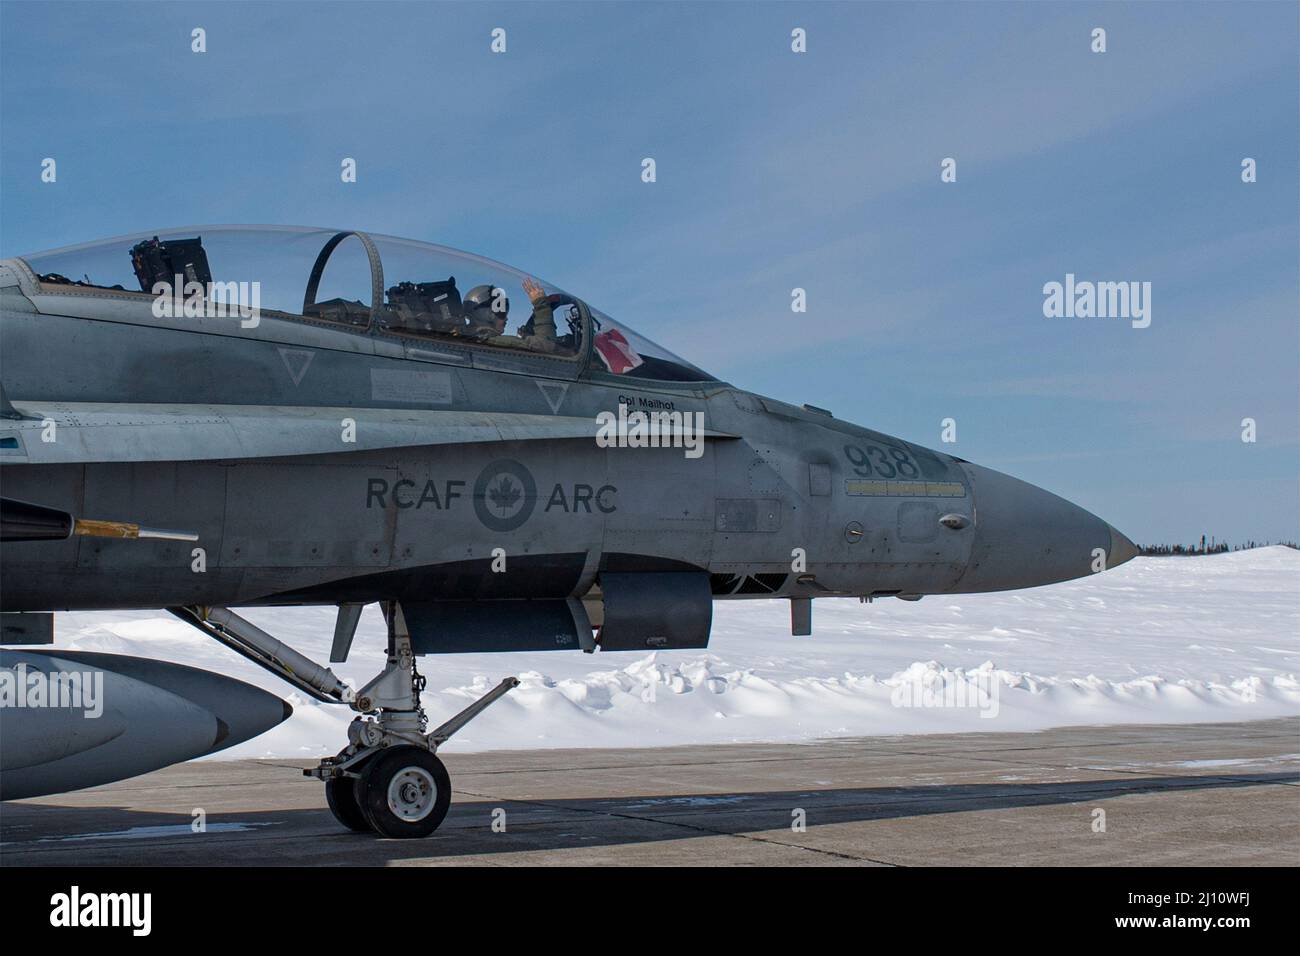 Goose Bay, Canada. 16 March, 2022. A Royal Canadian Air Force CF-18 fighter jet from 433 Tactical Fighter Squadron, taxis to depart during Operation Noble Defender March 16, 2022 in Goose Bay, Newfoundland, Canada. The NORAD exercise is part of recent military moves to deter Russian involvement in Ukraine.  Credit: CANR NORAD/U.S. Air Force/Alamy Live News Stock Photo